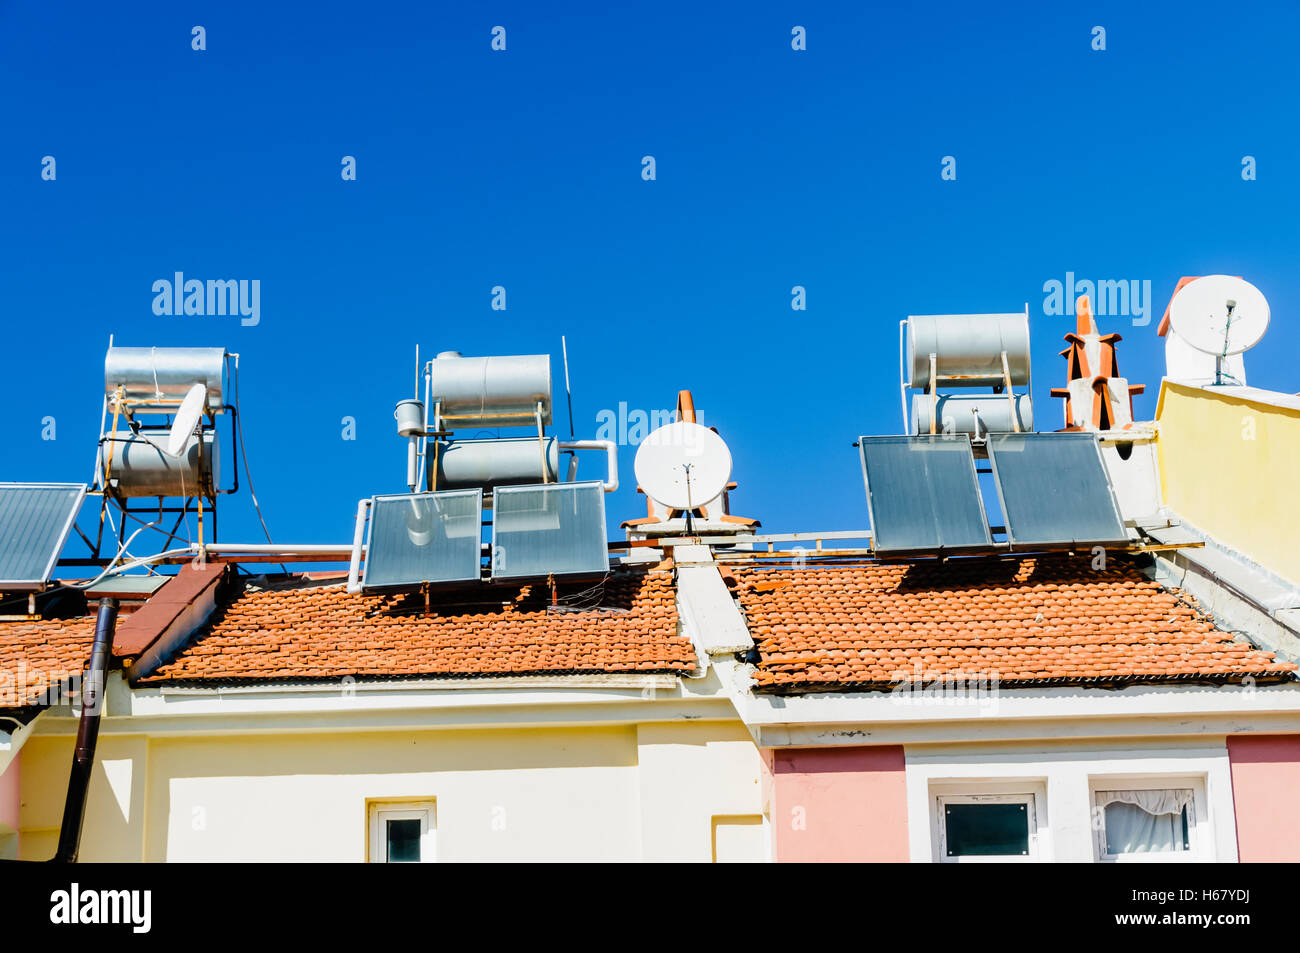 Solar water heaters and satellite dishes on the roof of a building in a hot climate. Stock Photo